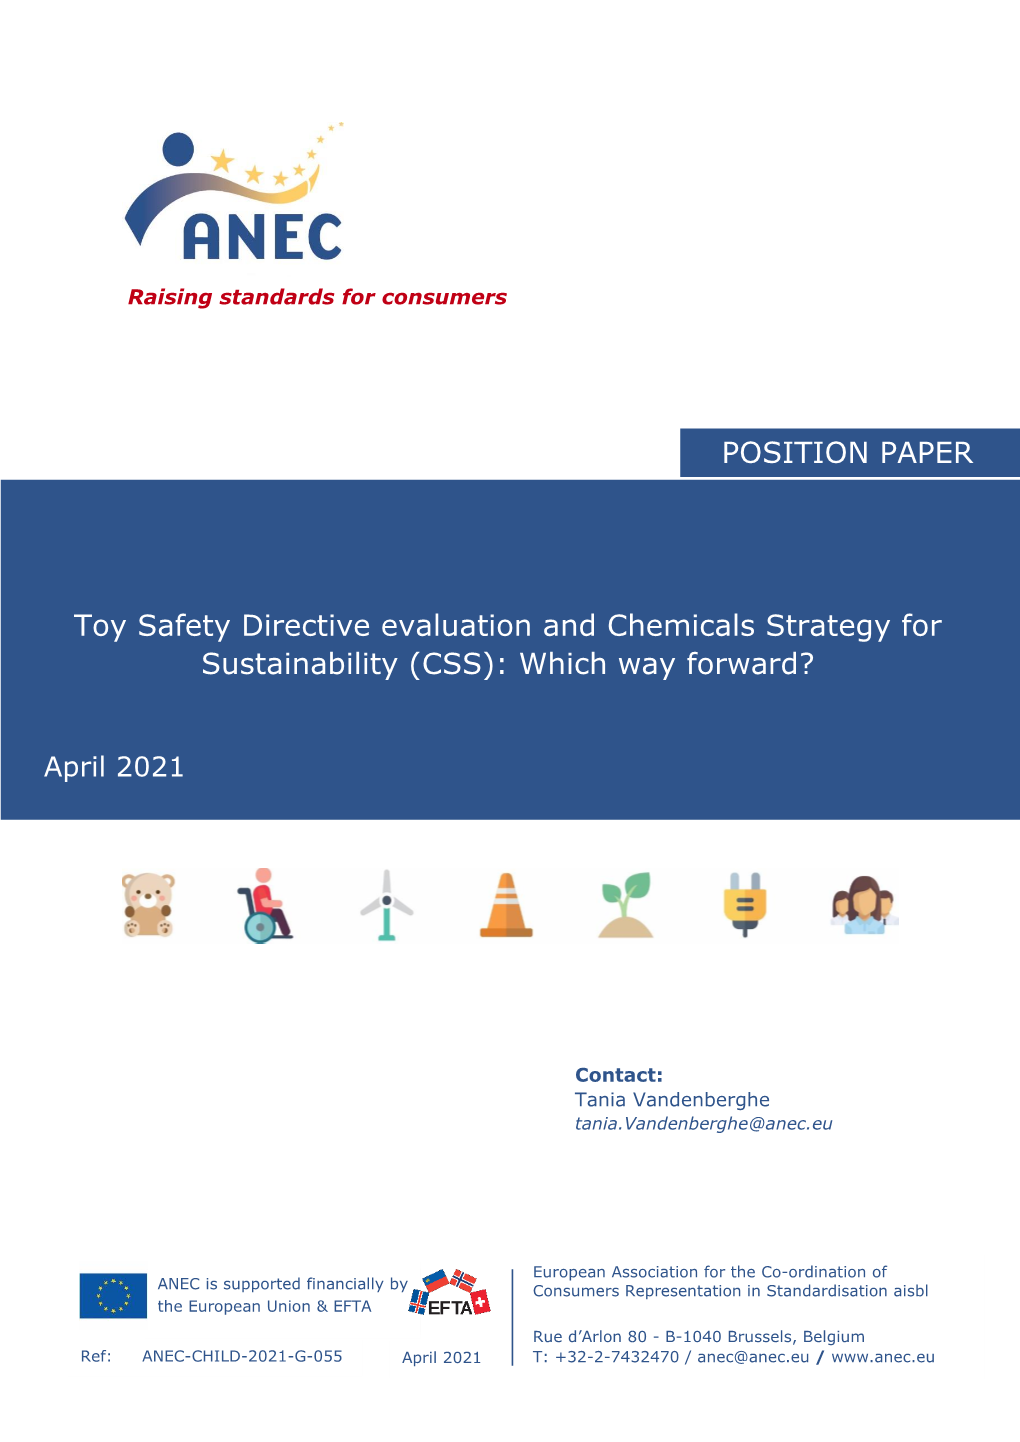 Toy Safety Directive Evaluation and Chemicals Strategy for Sustainability (CSS): Which Way Forward?